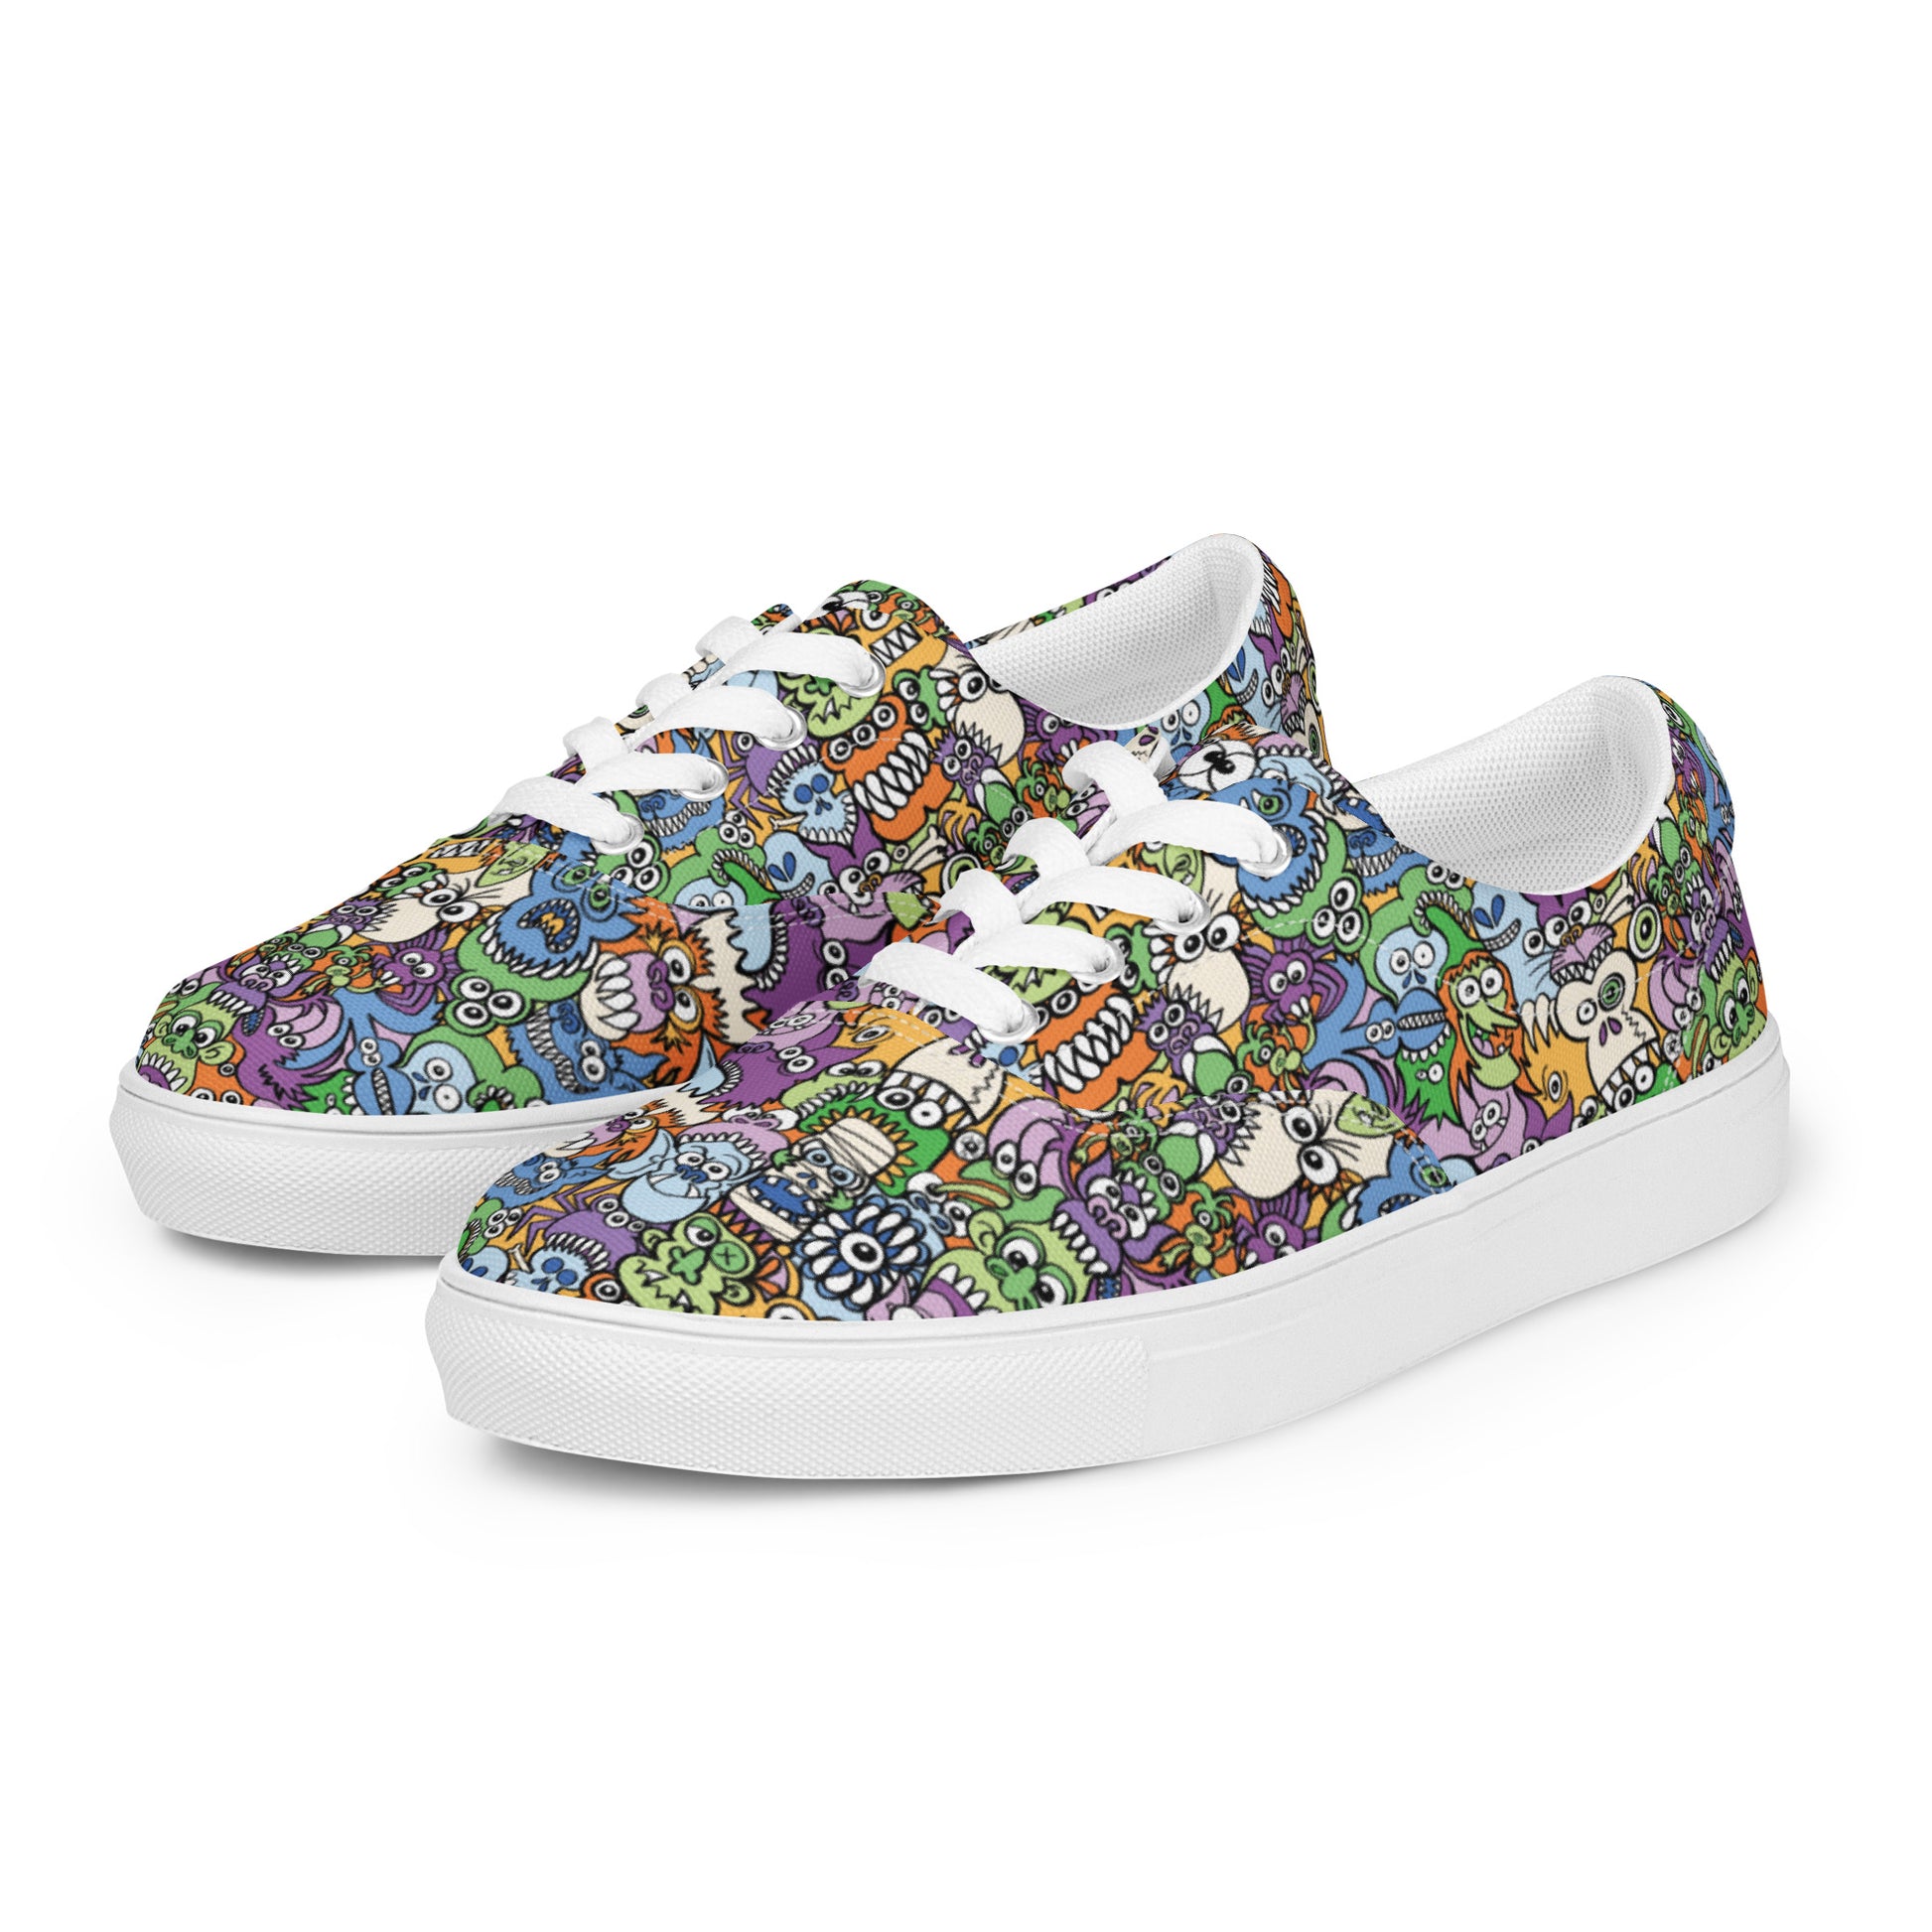 All the spooky Halloween monsters in a pattern design Men’s lace-up canvas shoes. Overview